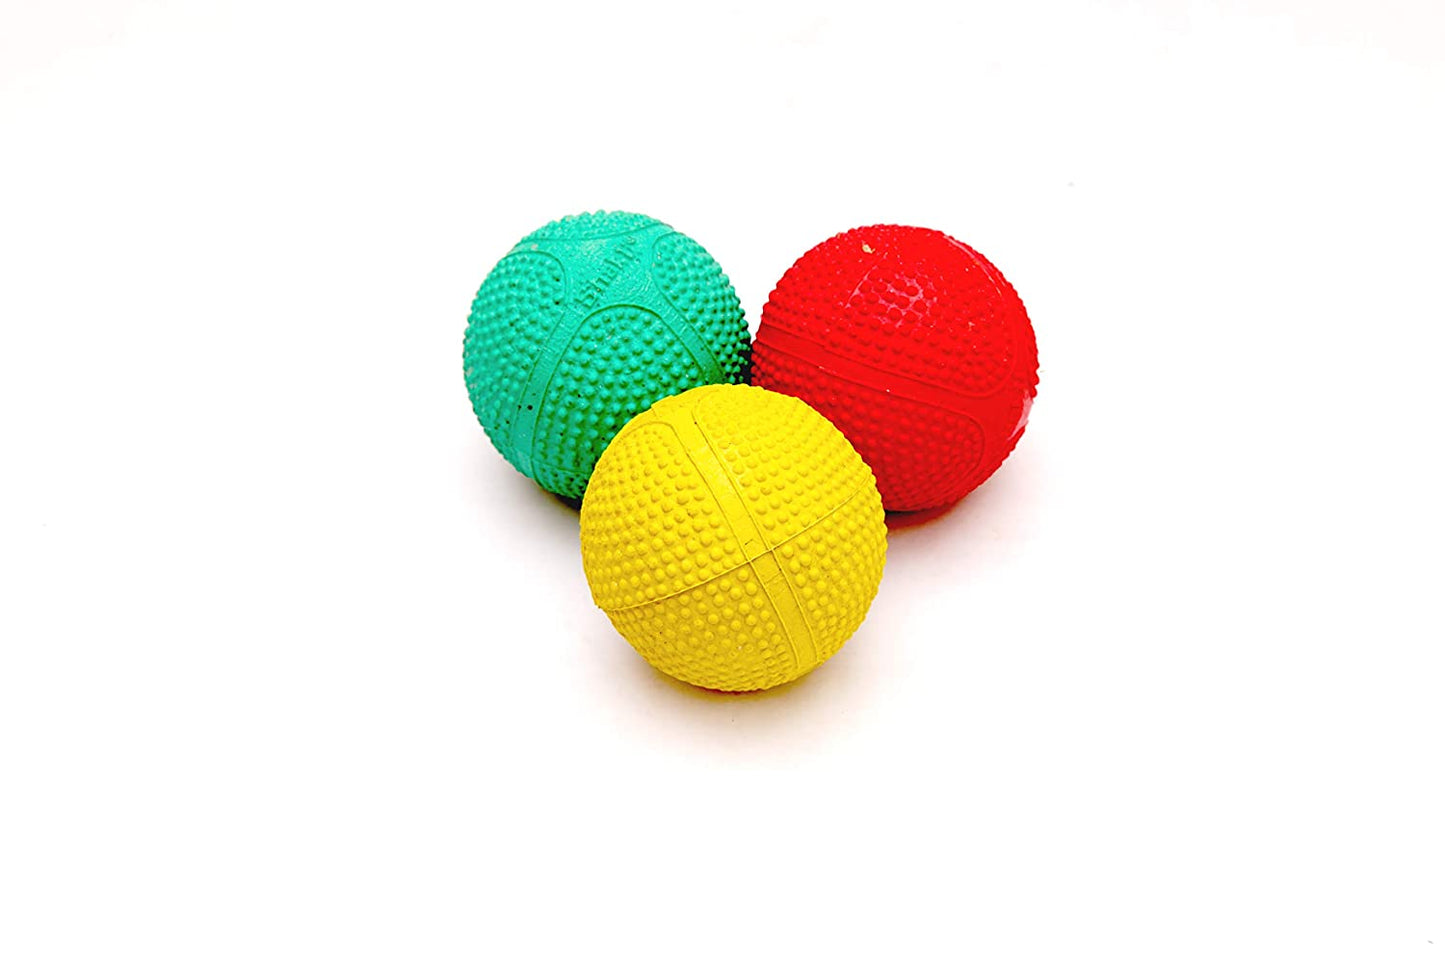 Sponge Rubber Ball for Outdoor Indoor Sports ( 12 Pcs), Multicolor